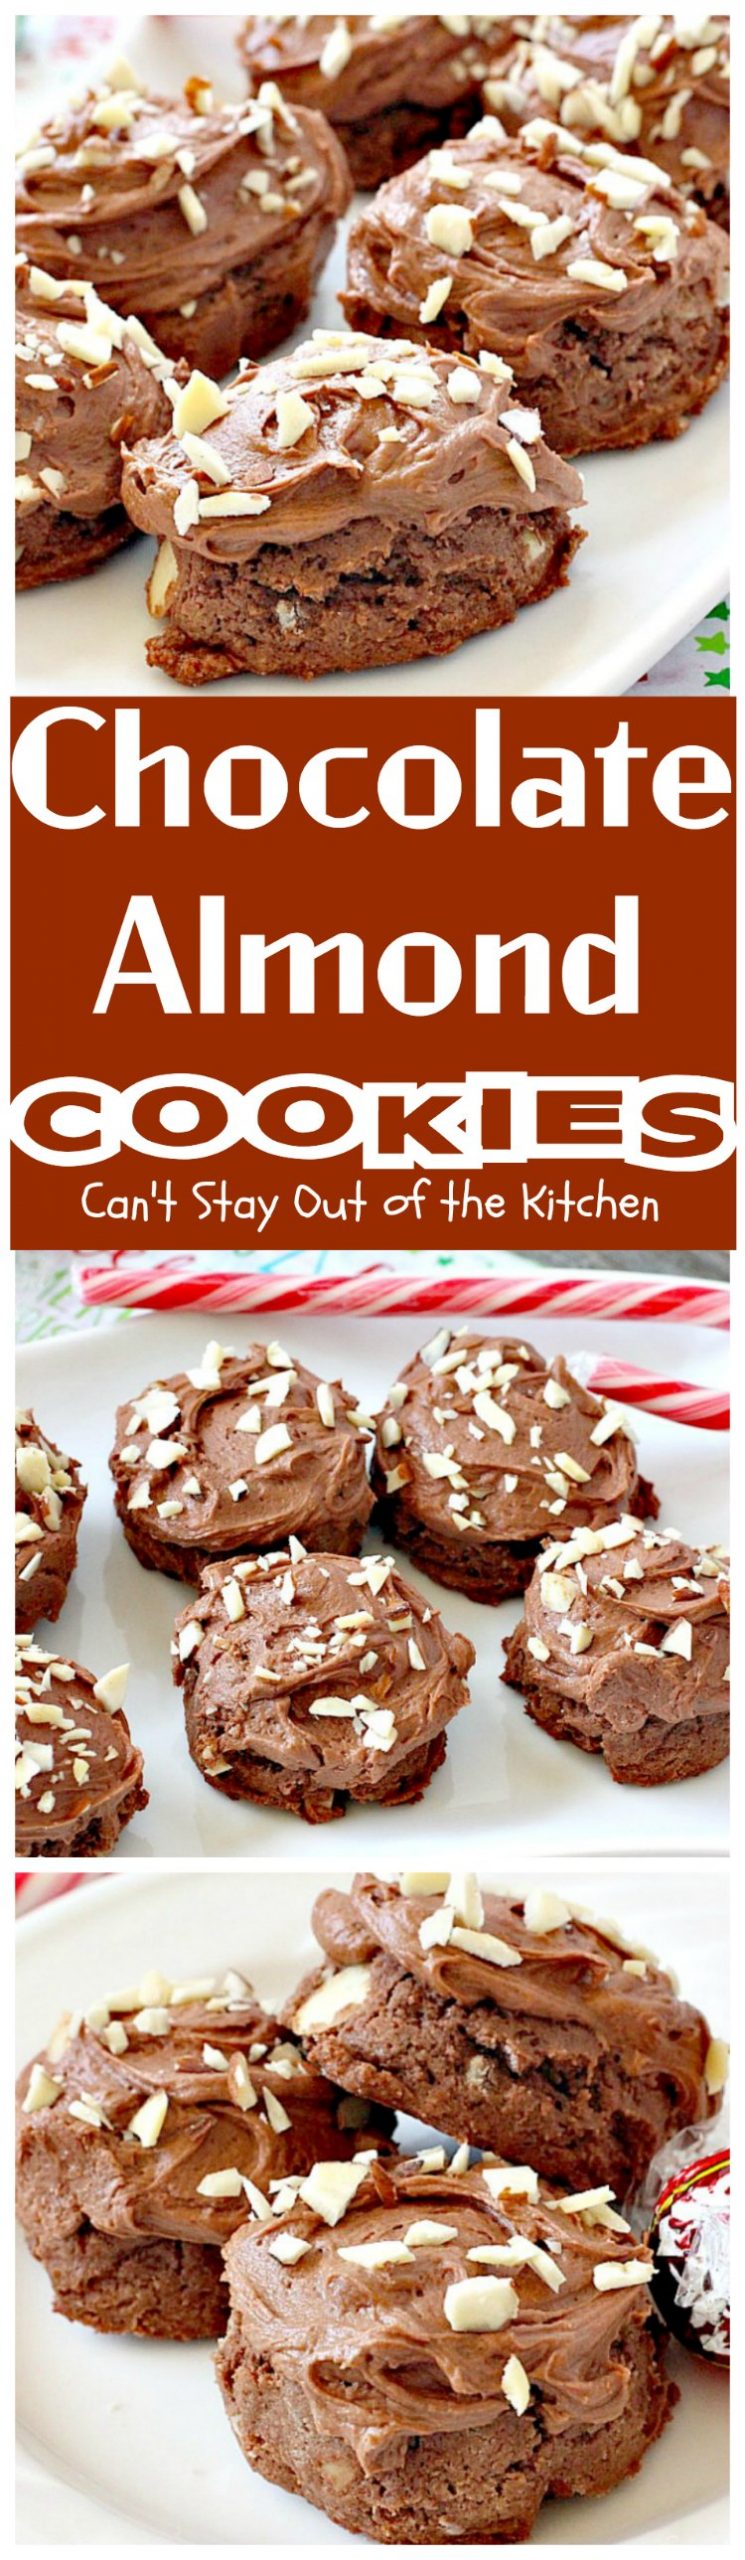 Chocolate Almond Cookies | Can't Stay Out of the Kitchen